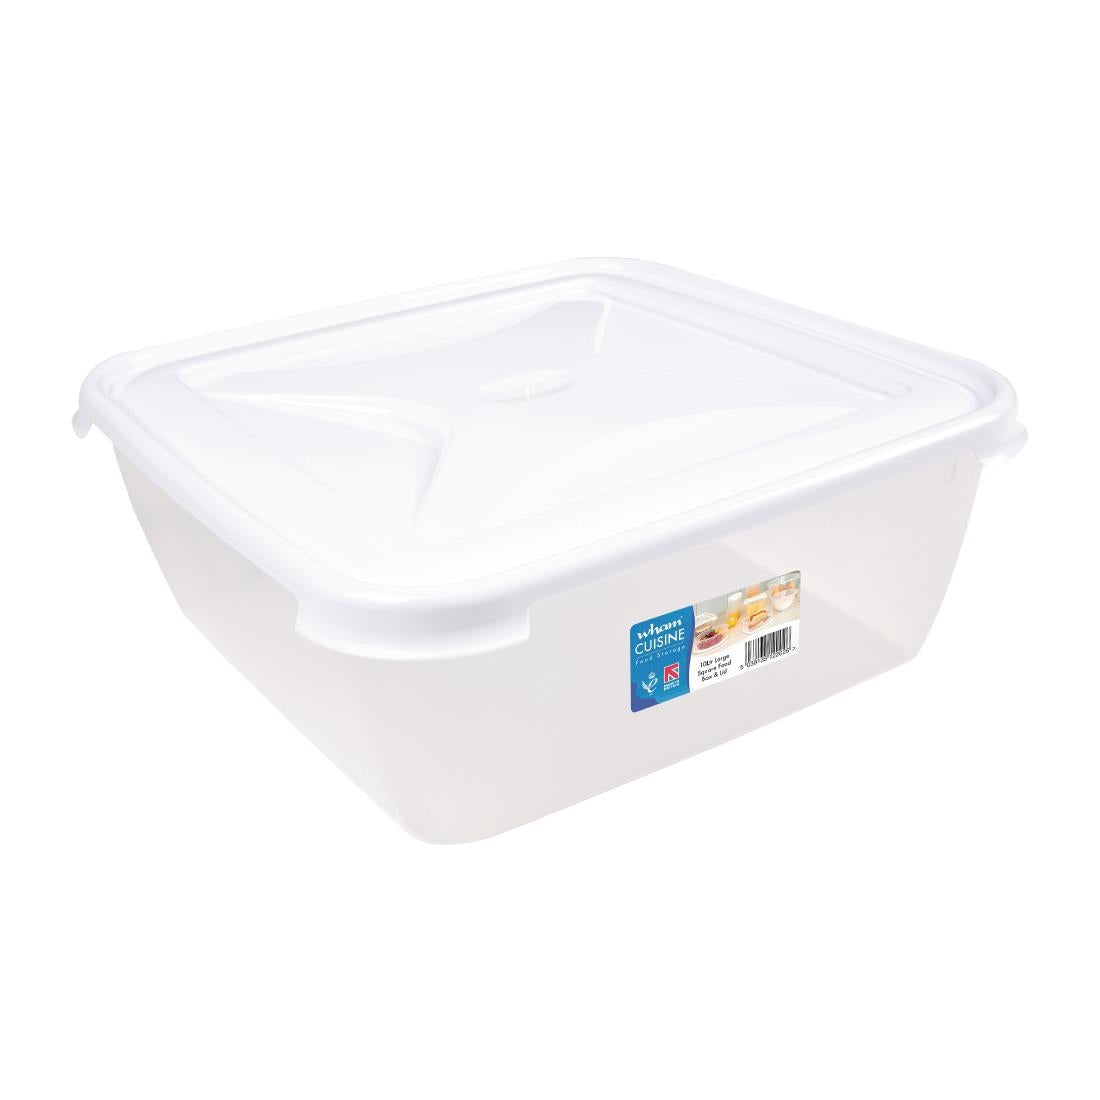 FS457 Wham Cuisine Polypropylene Square Food Storage Box Container 10ltr JD Catering Equipment Solutions Ltd